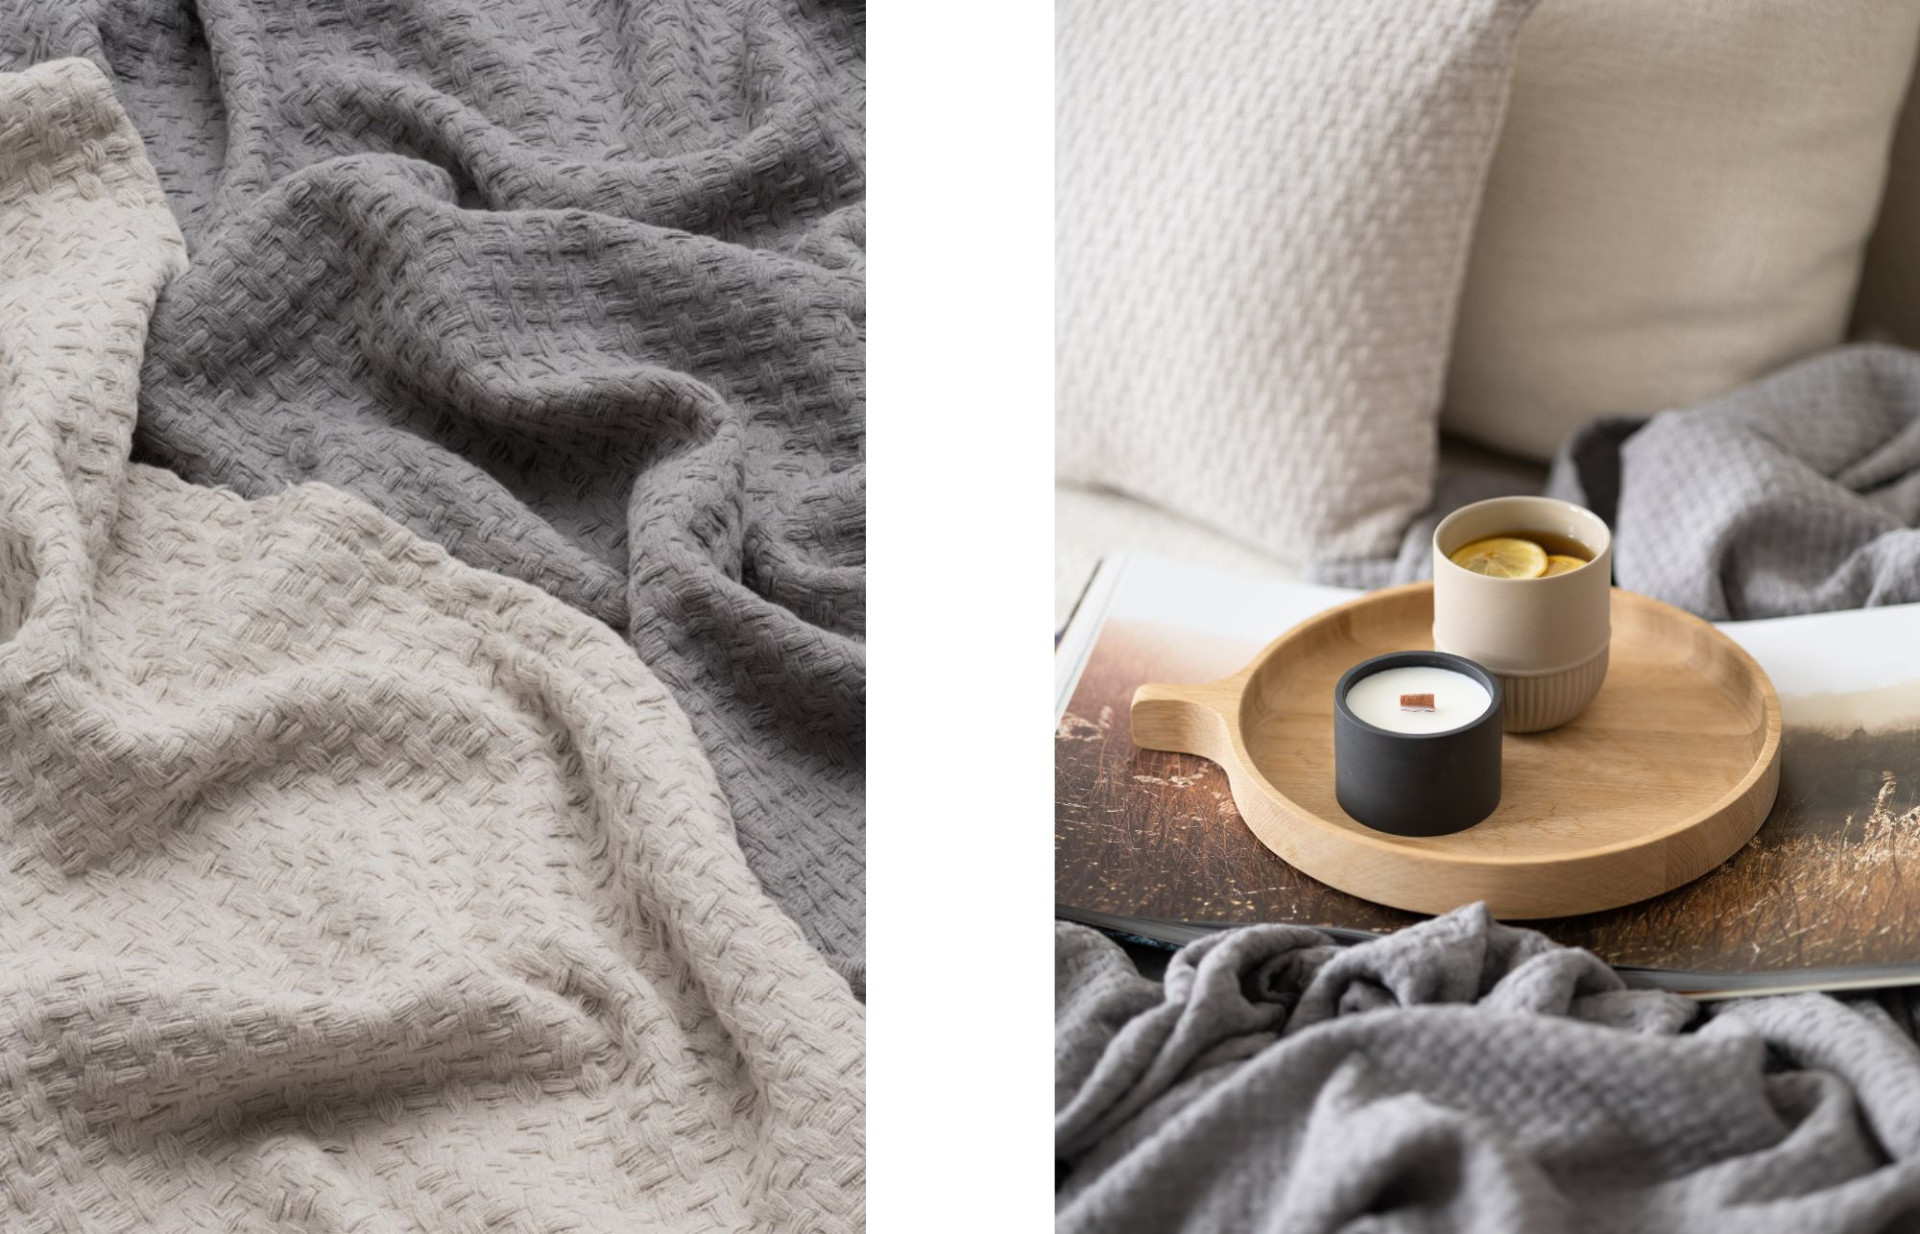 Bohemian Lab candle & Woven Monocolour Bed Throw.